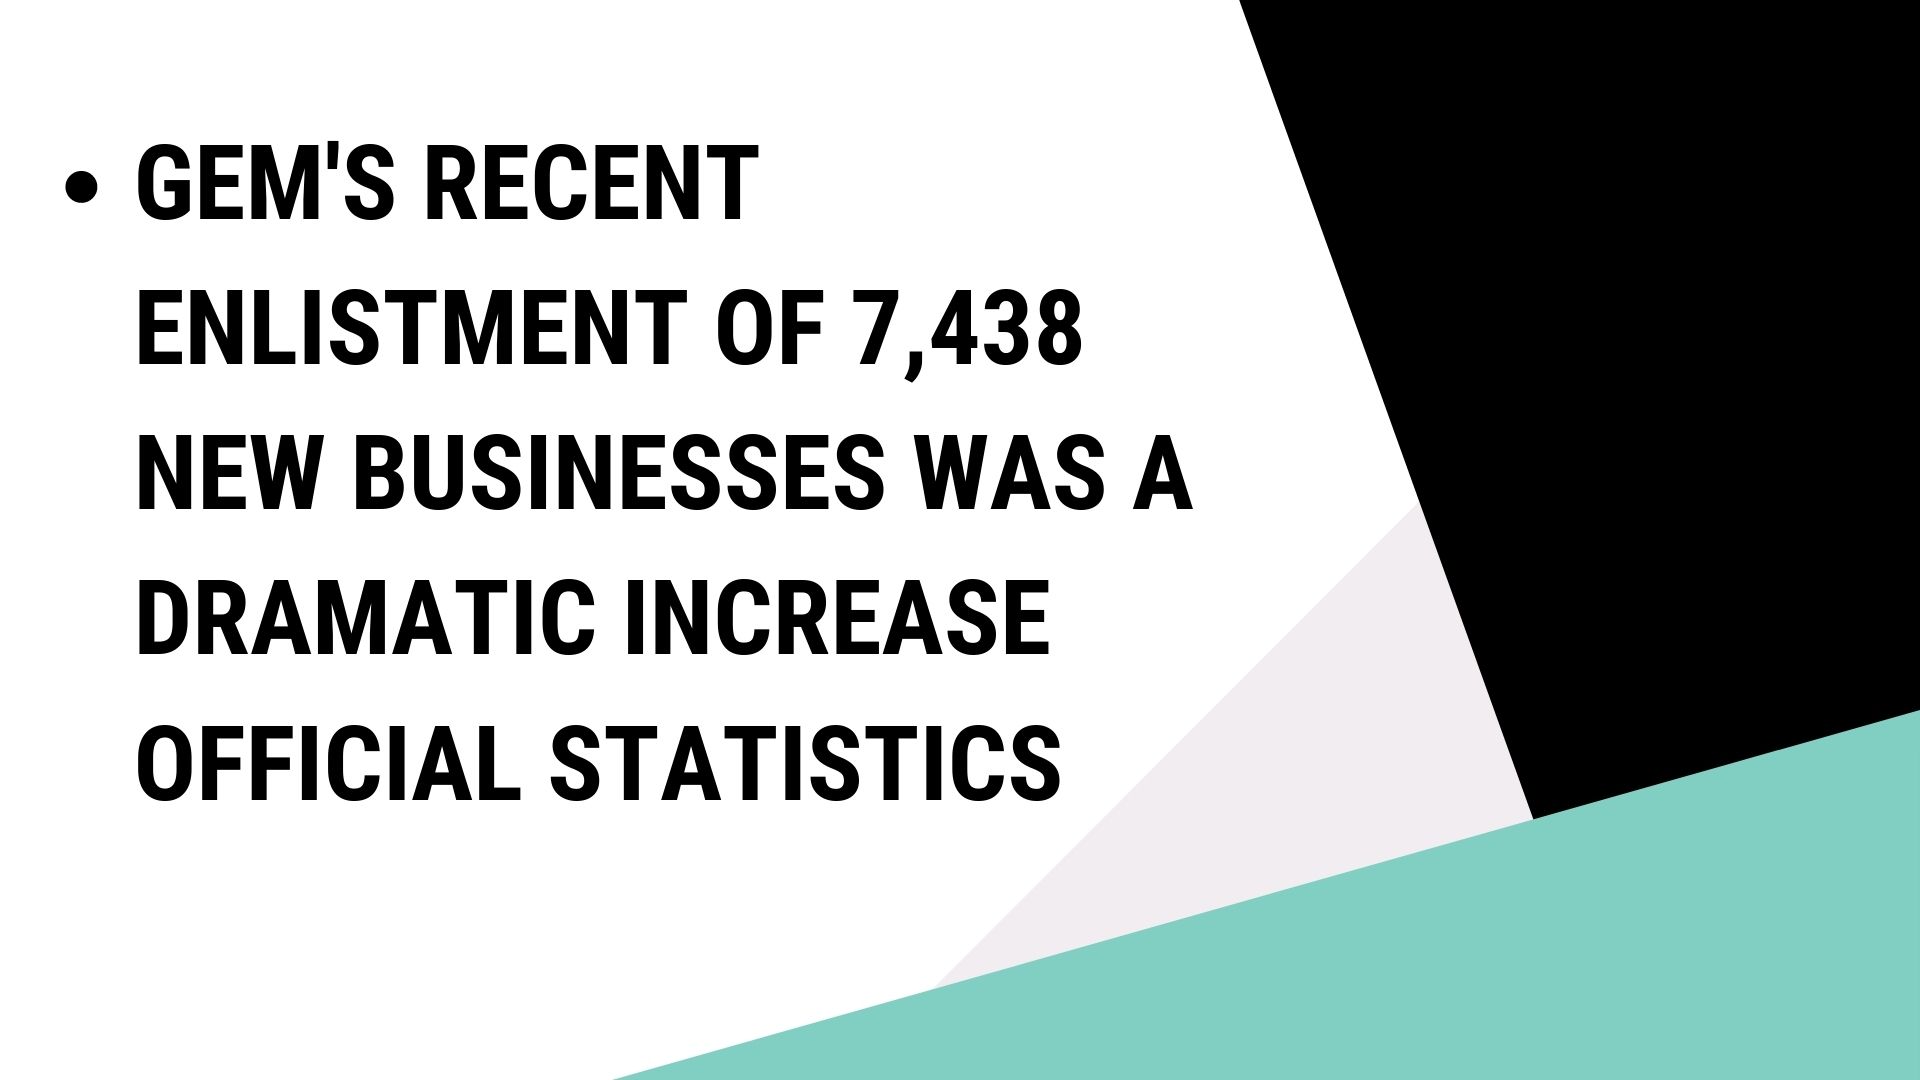 GeM's recent enlistment of 7,438 new businesses was a dramatic increase Official statistics